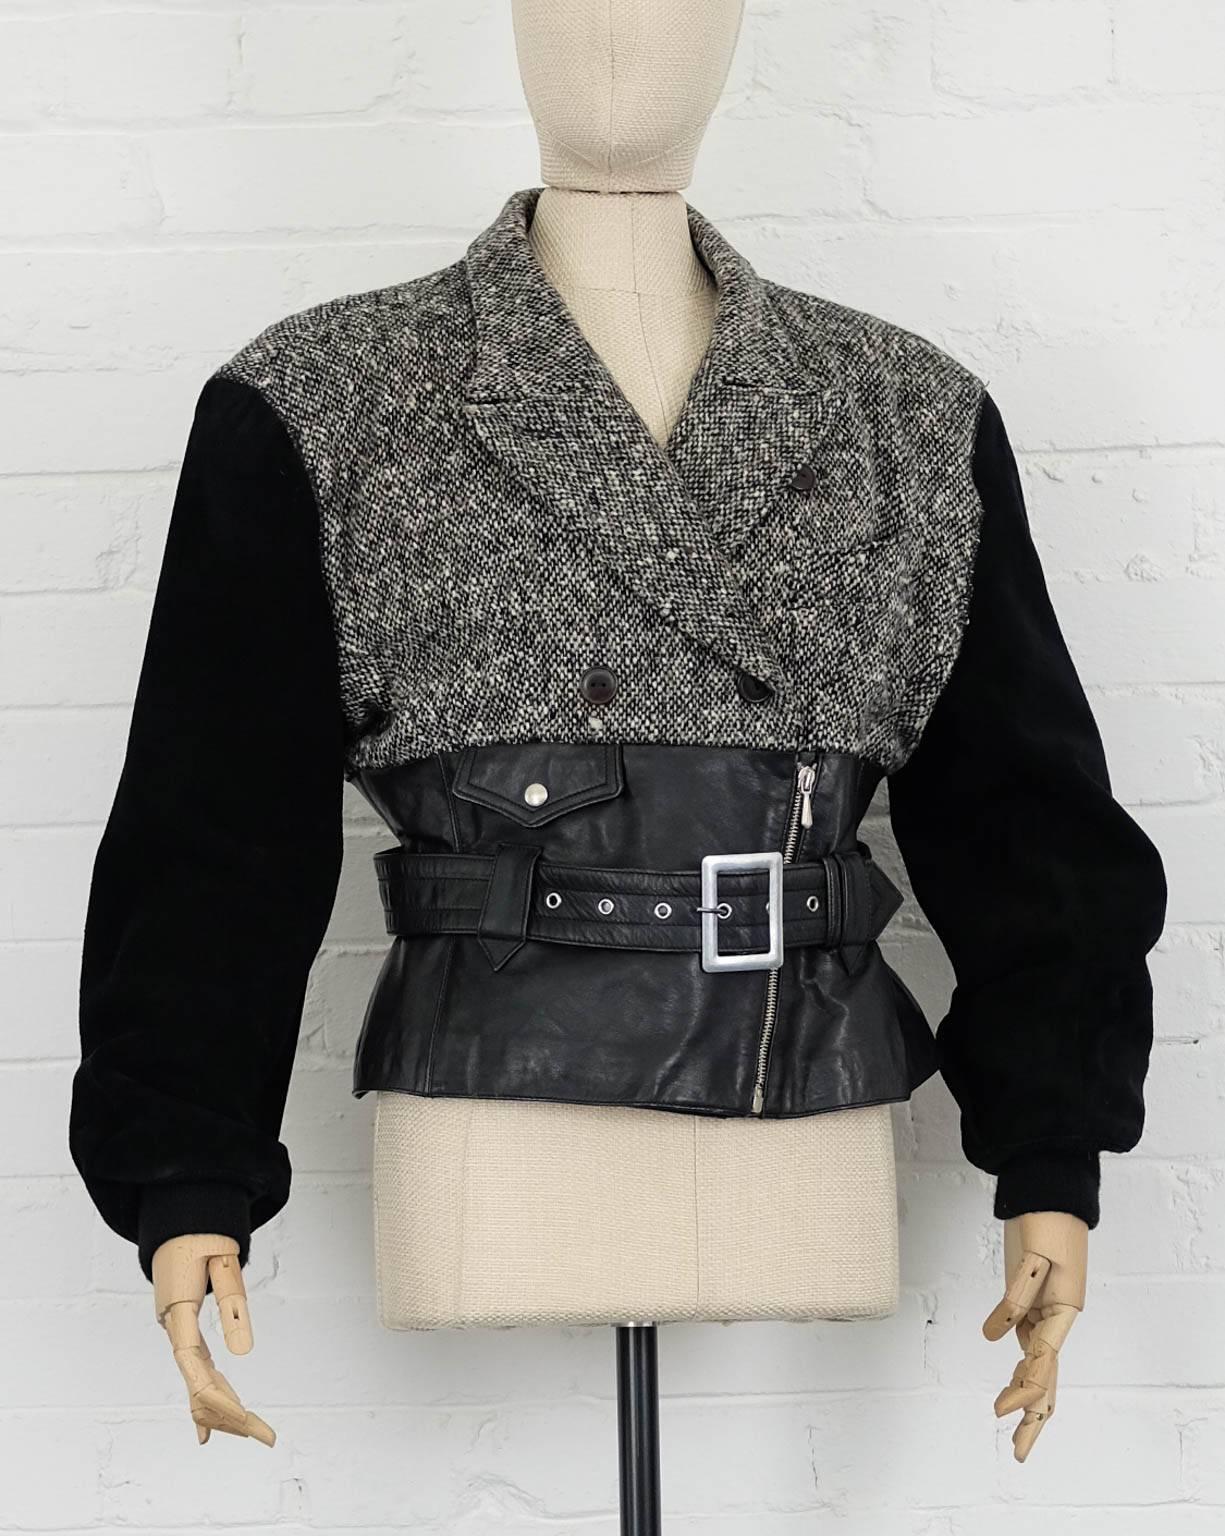 Black leather, suede and wool blend  biker jacket from Jean Paul Gaultier Vintage featuring notched lapels, a chest pocket, a double breasted front fastening, a belted waist, a front zip fastening, long sleeves, a grey tweed top and a press stud